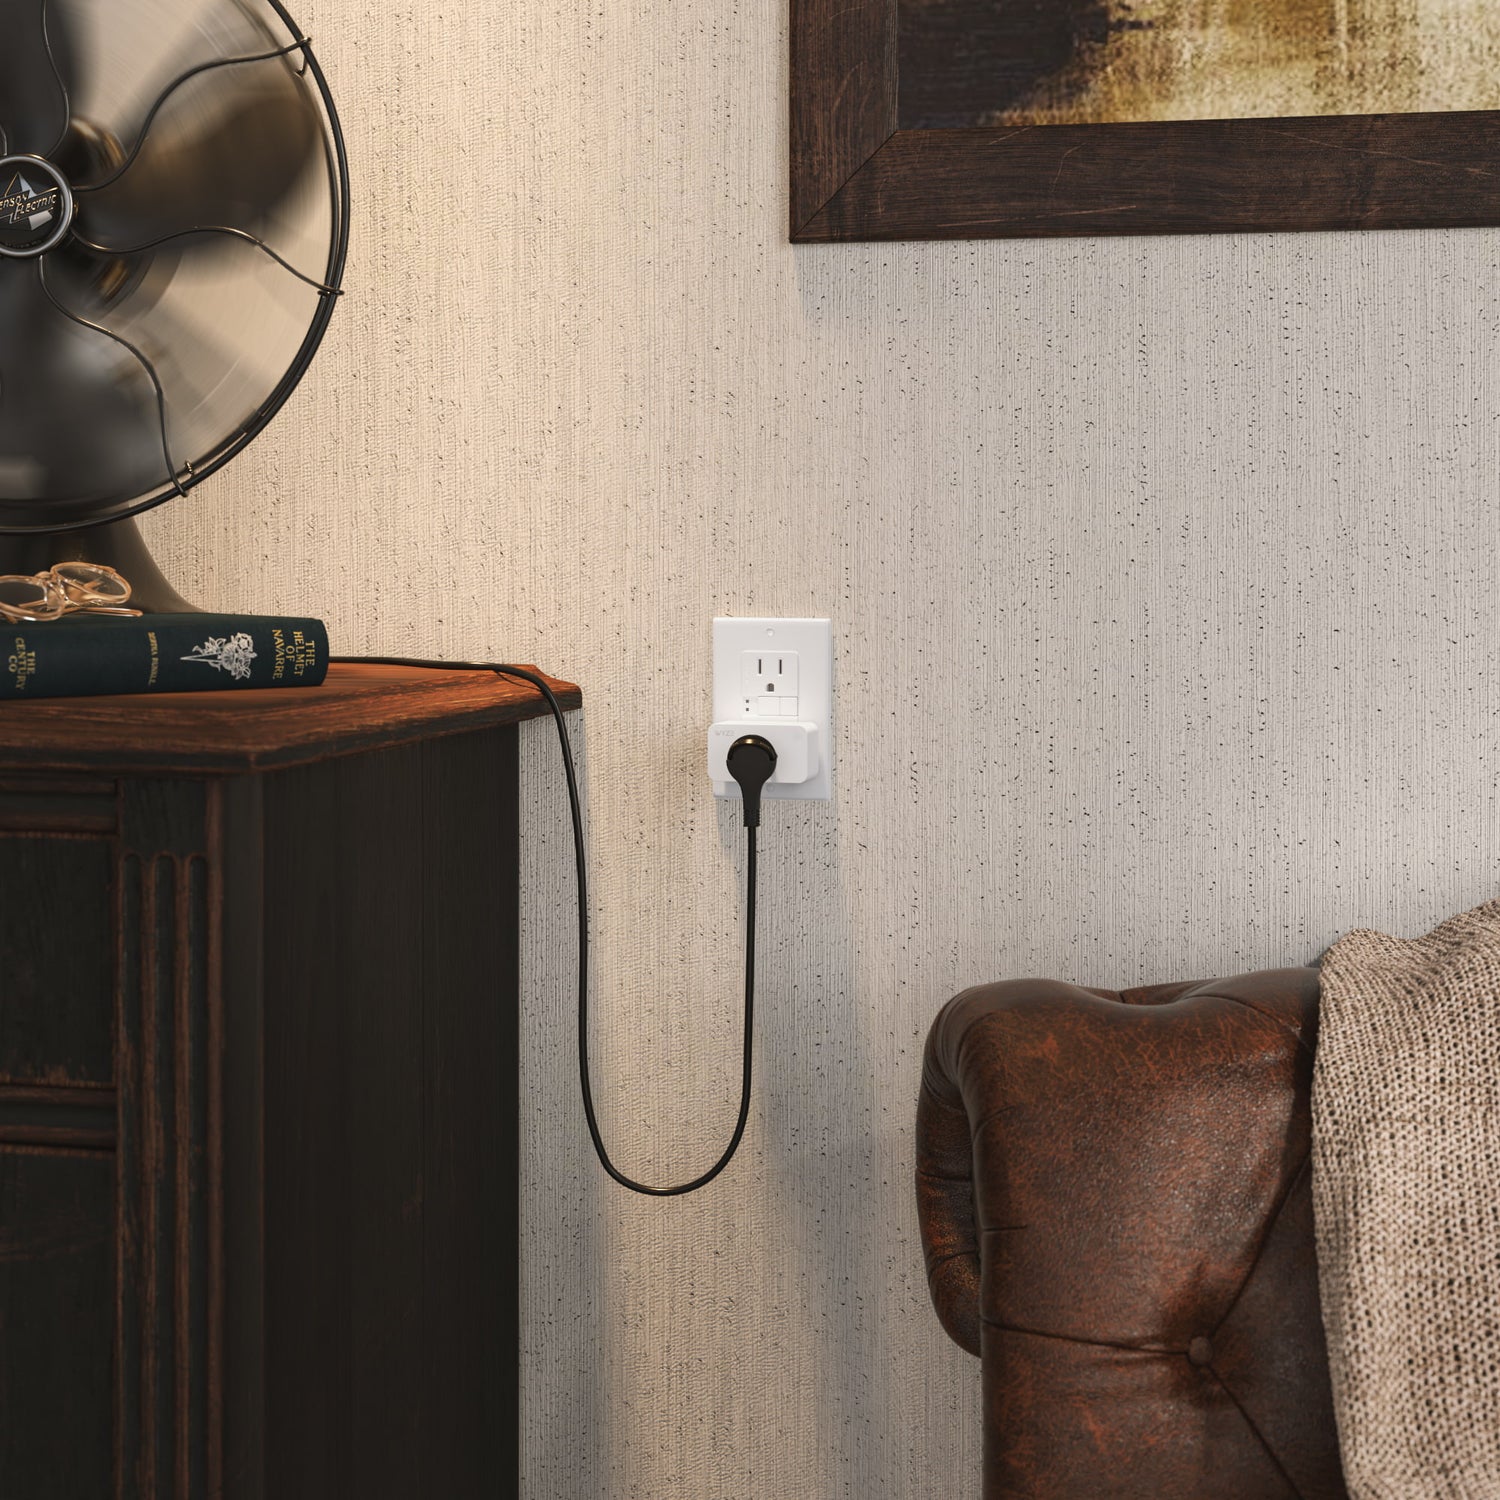 Wyze Plug in a wall outlet with a small house fan attached